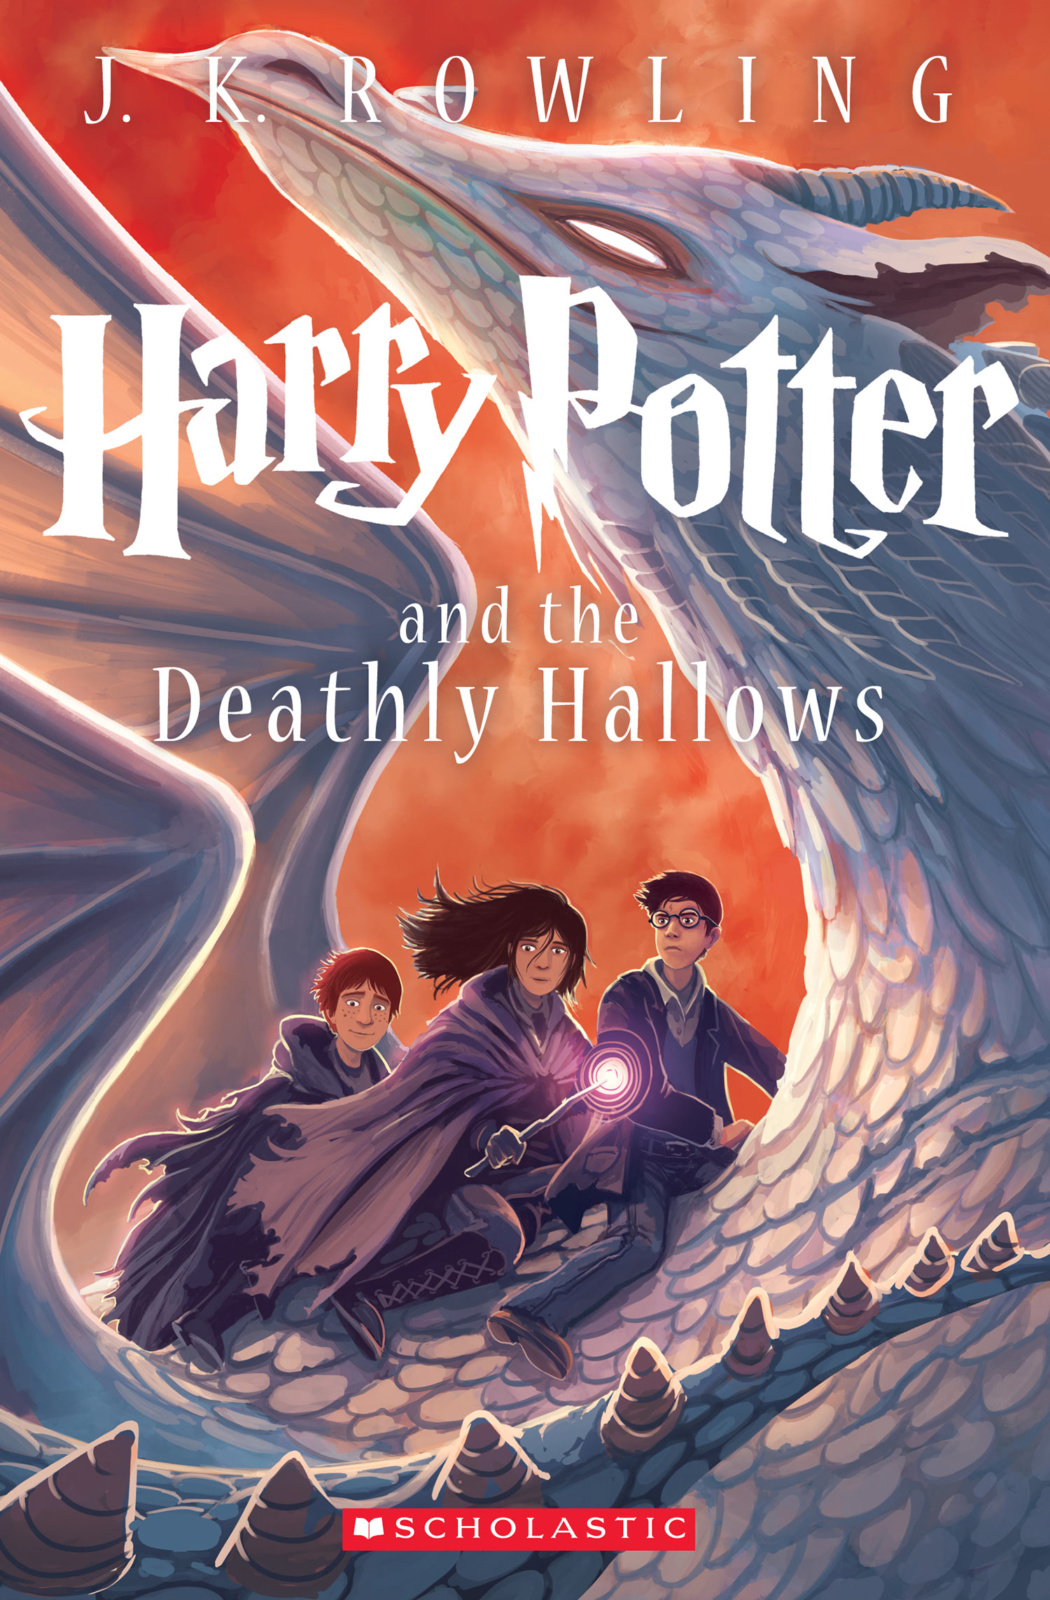 ‘Deathly Hallows’ (Book 7) — Harry Potter Fan Zone